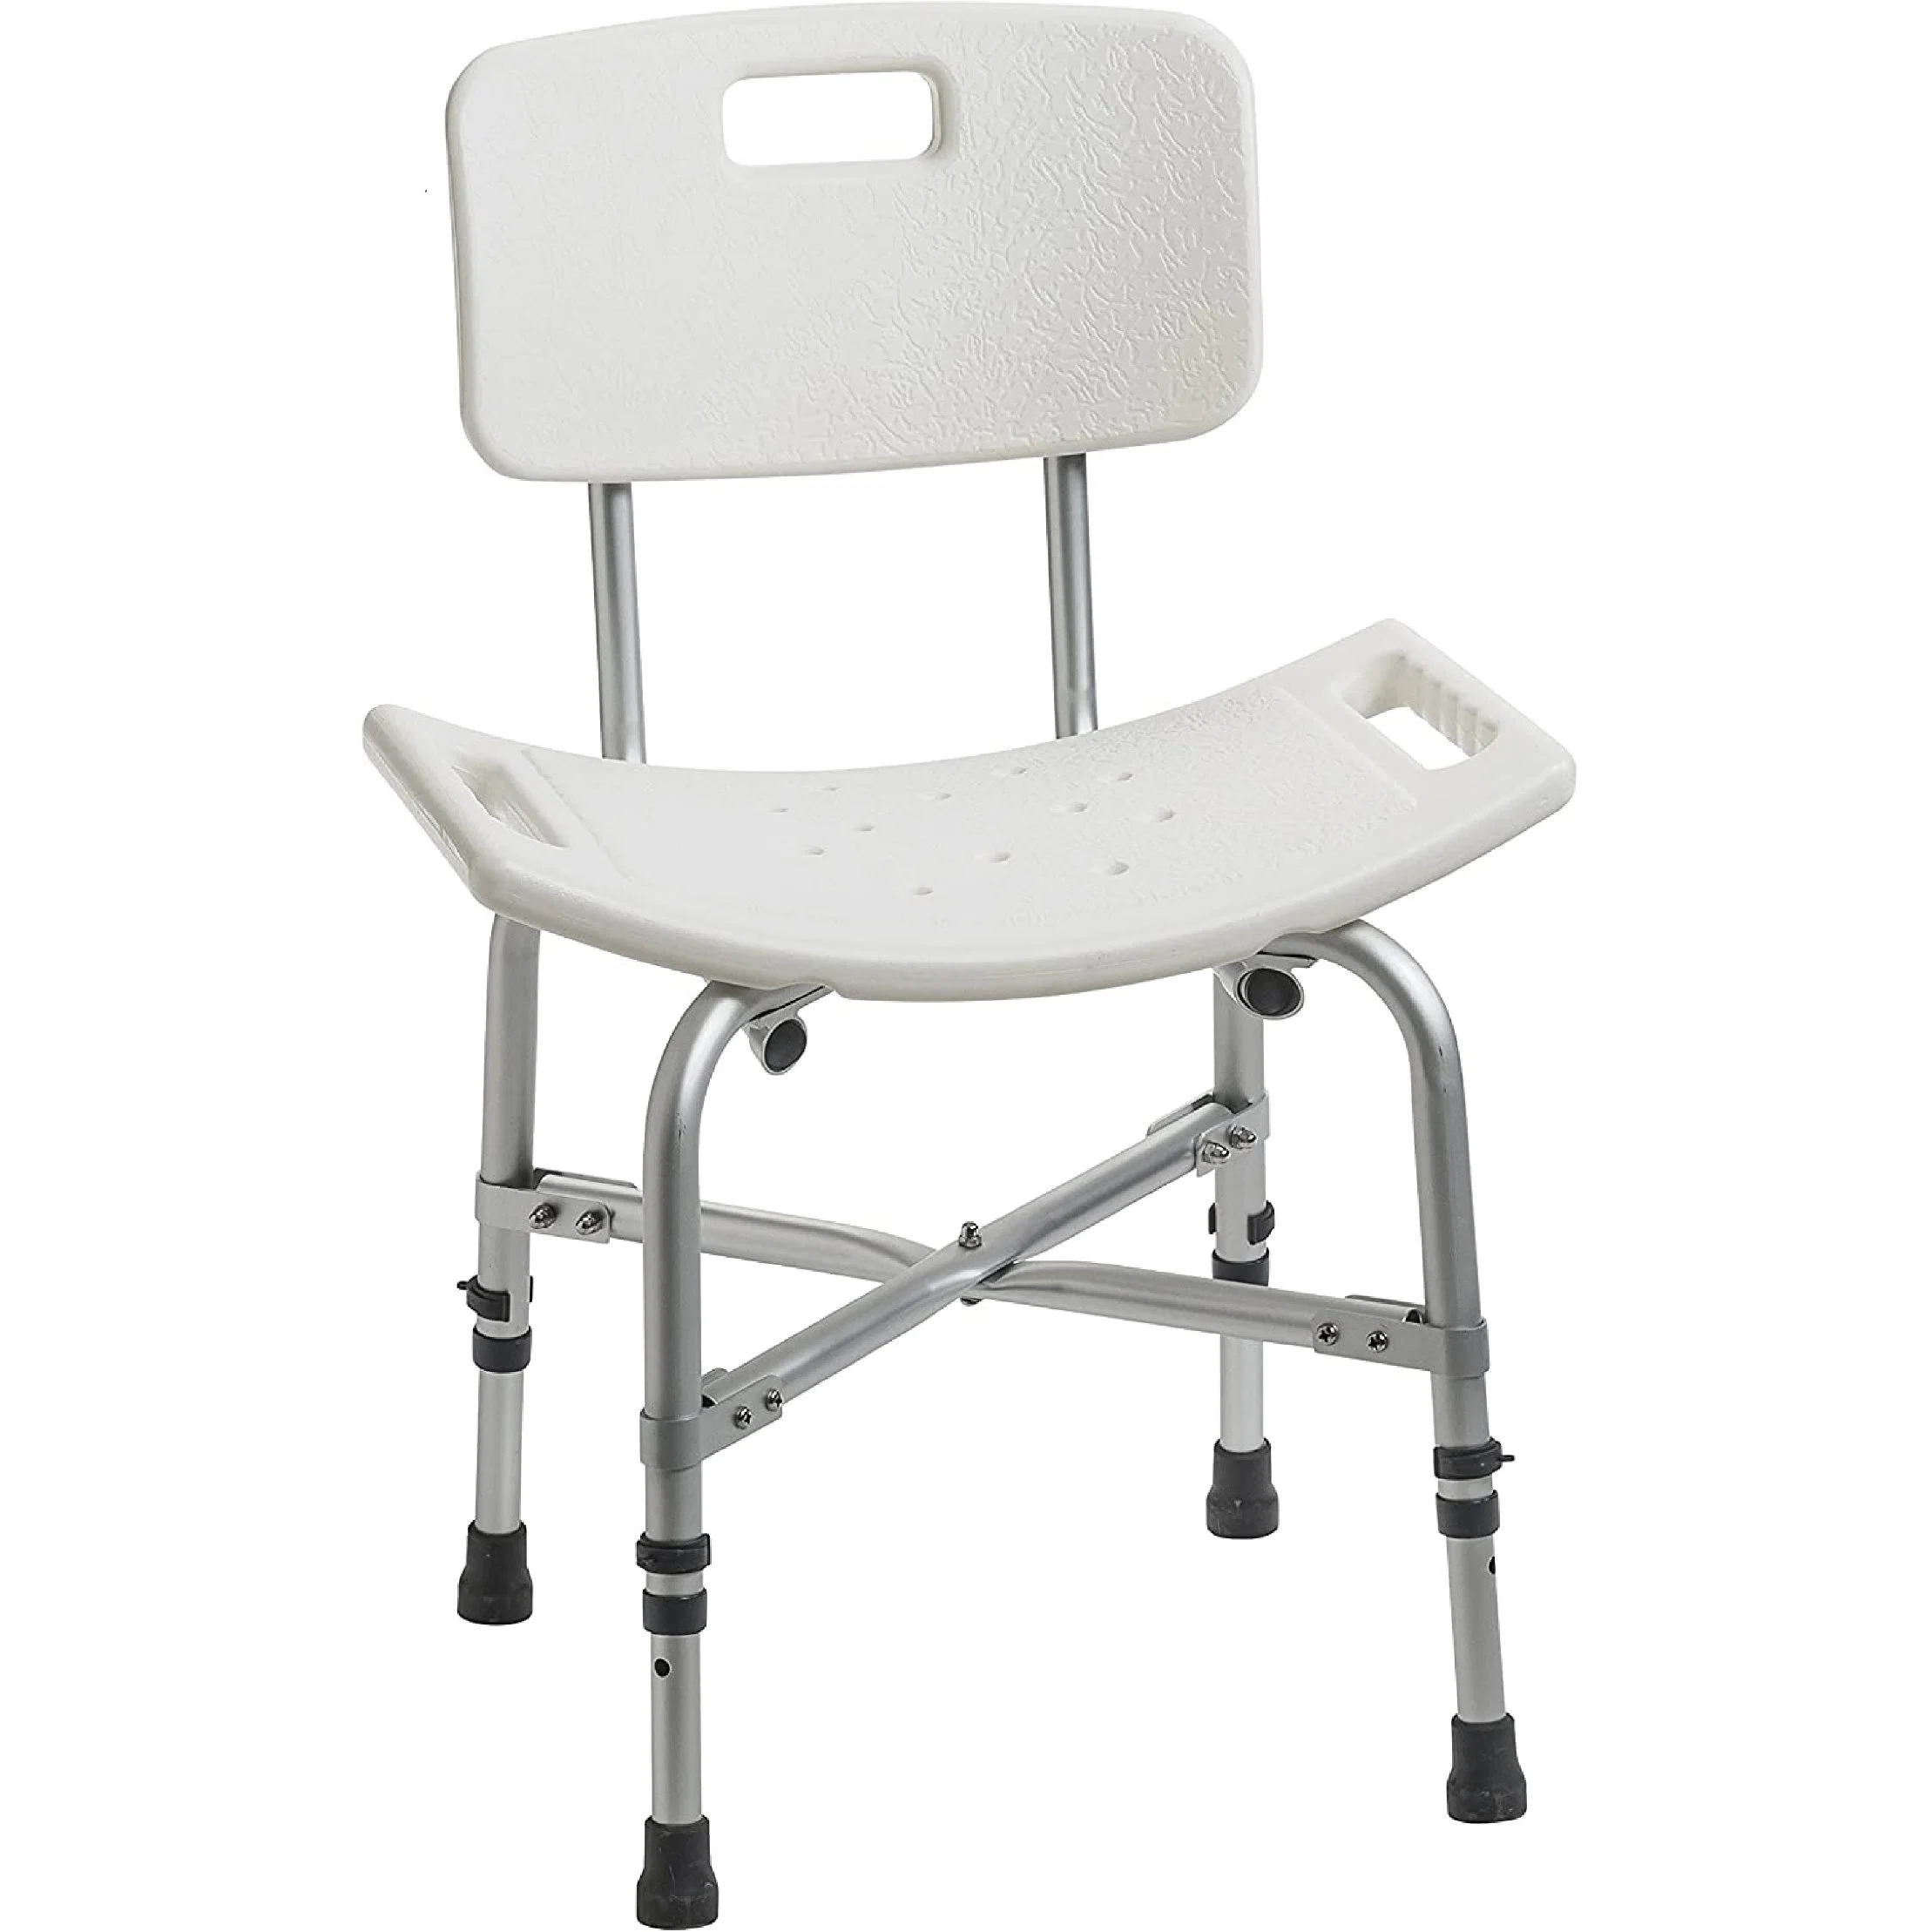 Bath Shower Seat Adult Bathroom Chairt for Disabled Elderly People Wheelchair